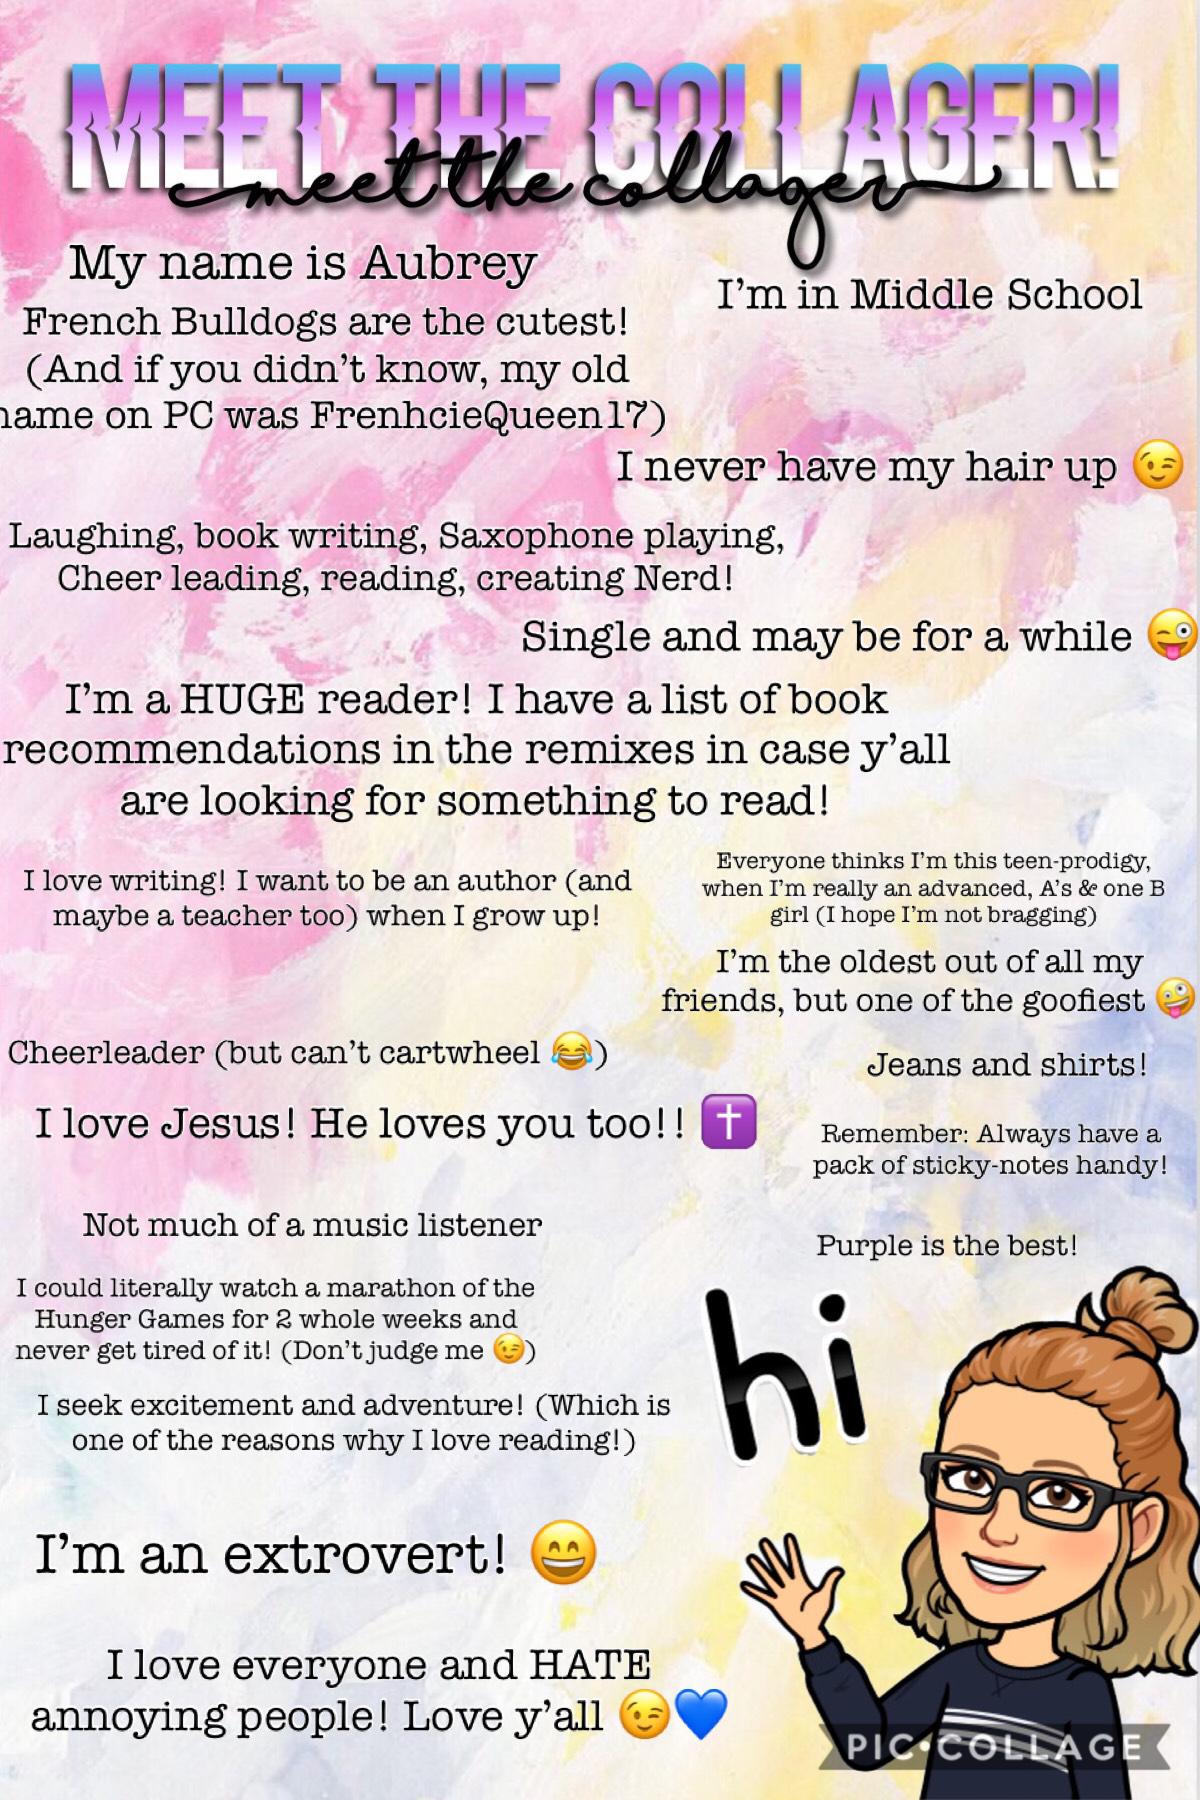 Fun facts about me! I know it’s SUPER detailed...but heck, life’s a journey! Look in the remixes for some book recommendations! 💙